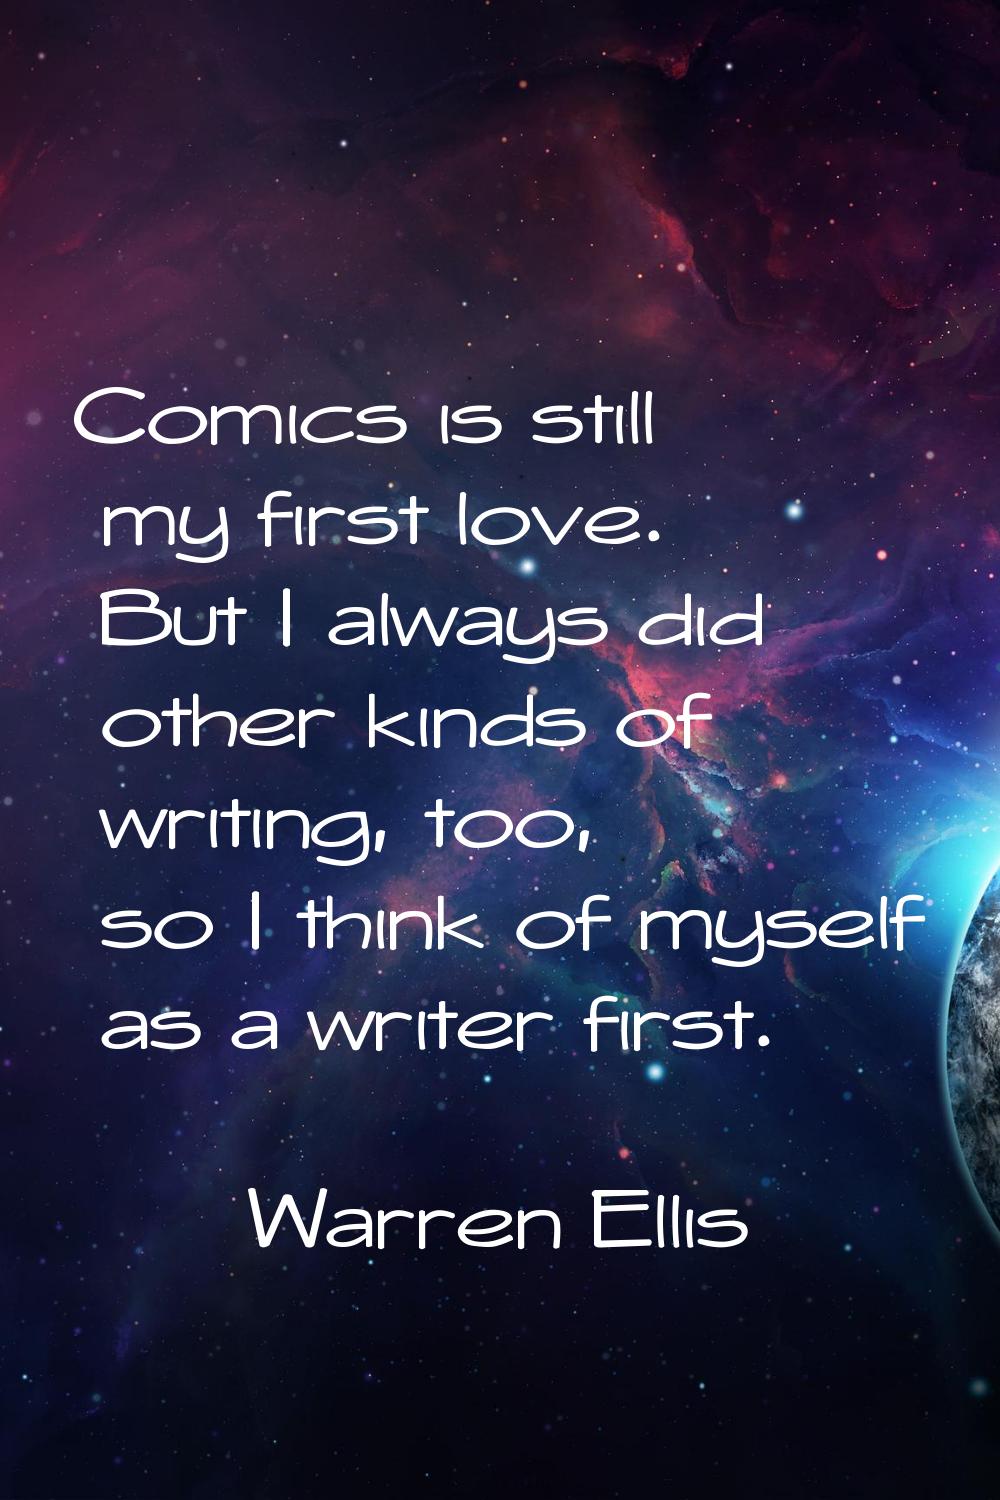 Comics is still my first love. But I always did other kinds of writing, too, so I think of myself a